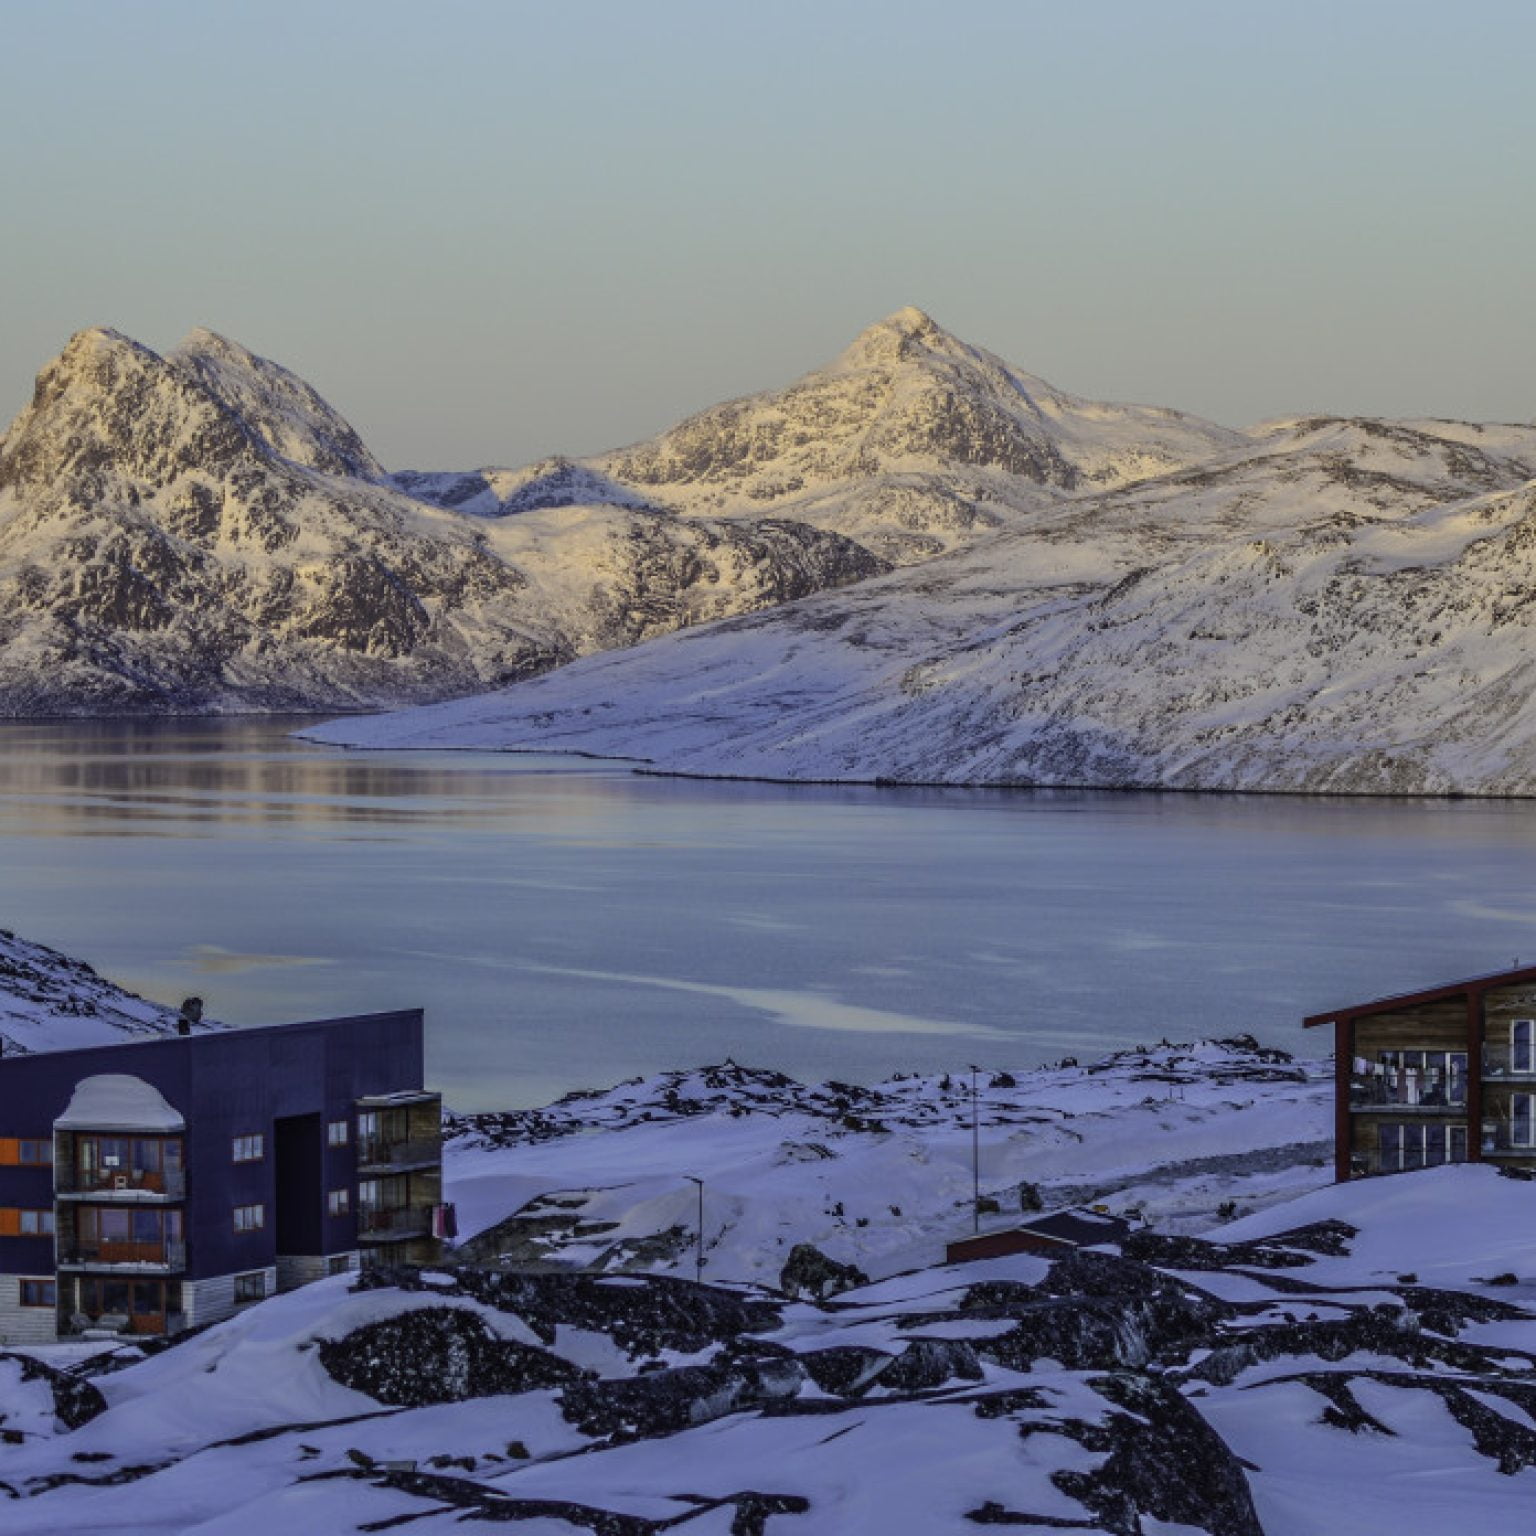 greenland administrative center and largest city with 2784 inhabitants the t20 omk0QW Greenland stops oil and gas exploration, climate costs 'too high'